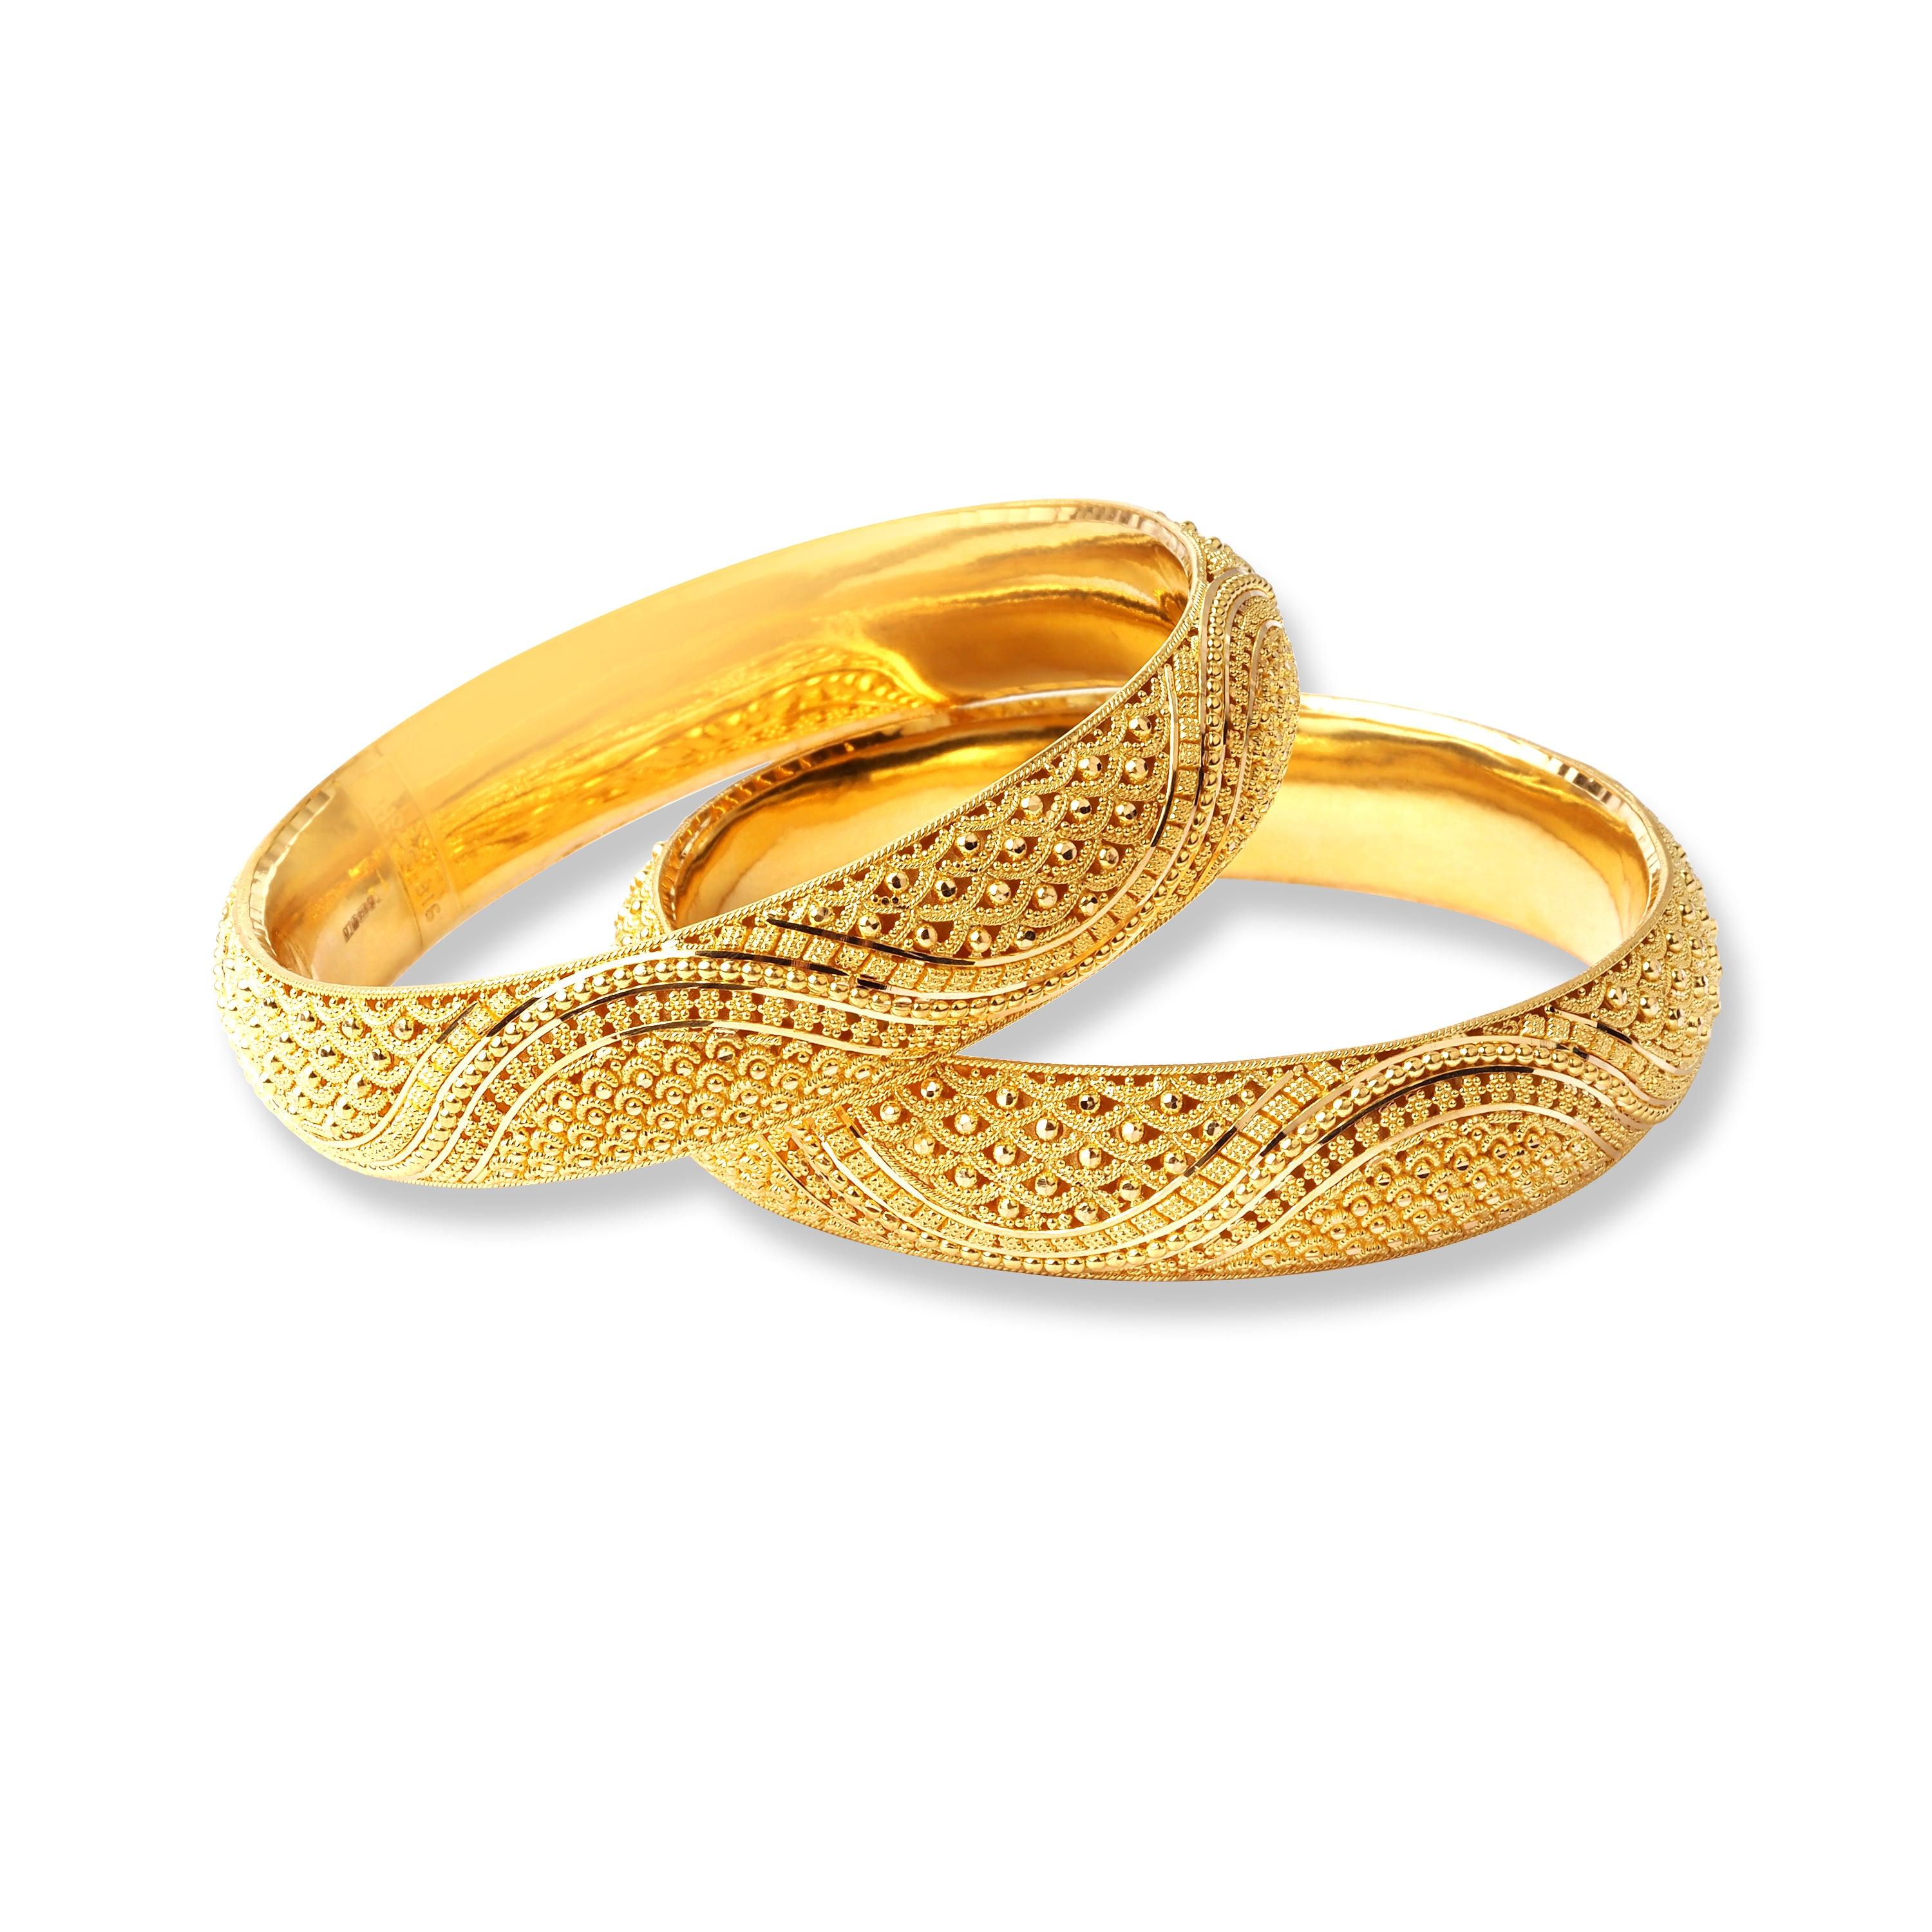 22ct Gold Pair of Bangles with Filigree Work & Comfort fit Finish B-8510 - Minar Jewellers